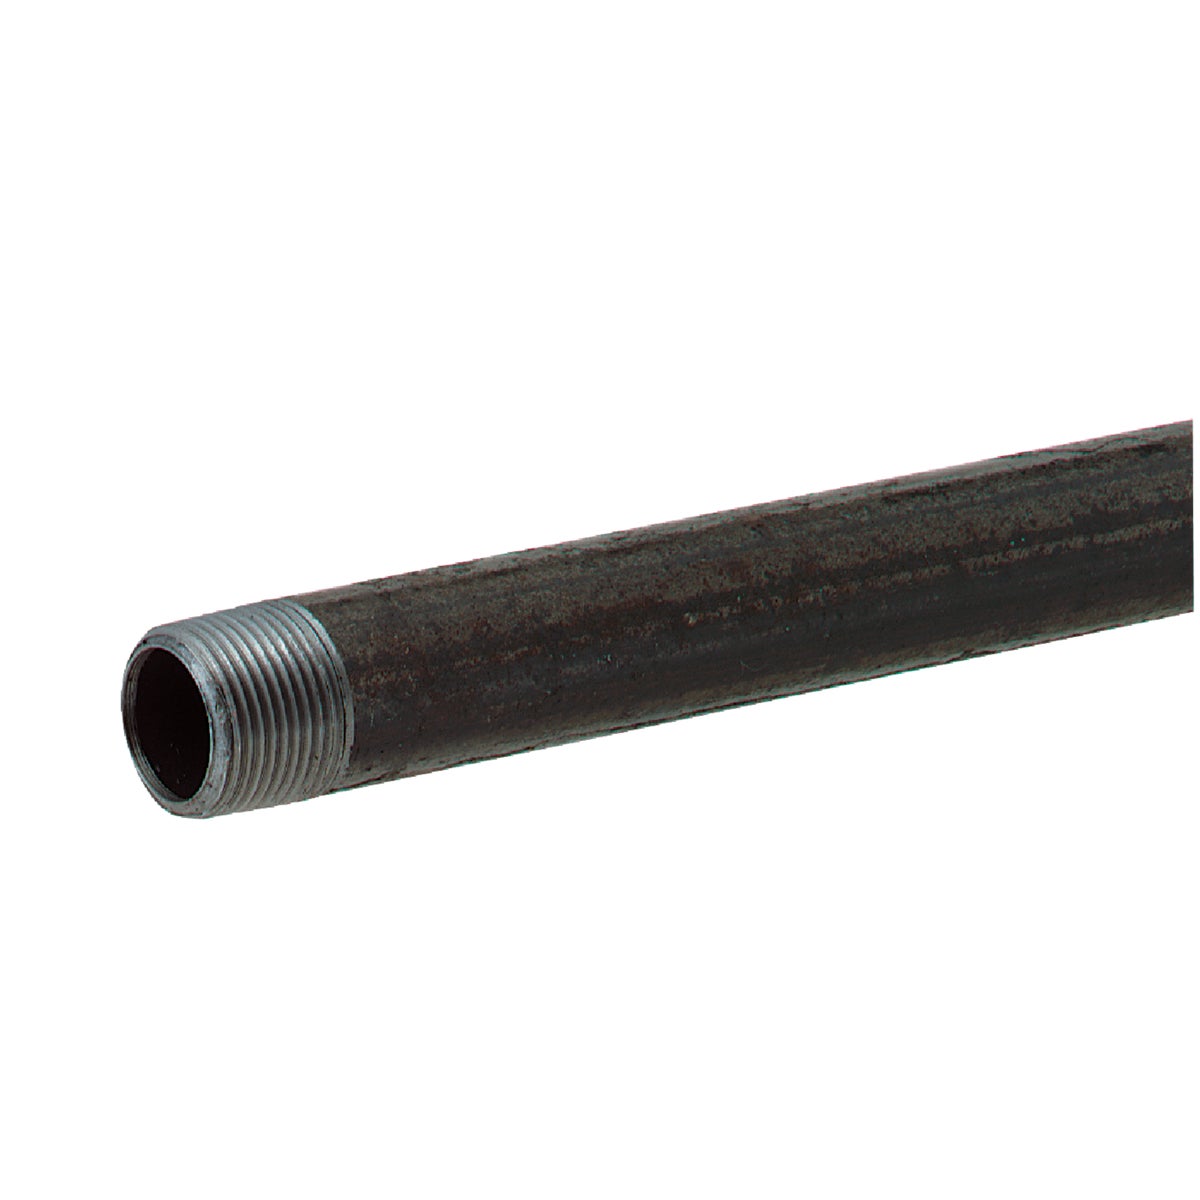 Southland 2 In. x 24 In. Carbon Steel Threaded Black Pipe